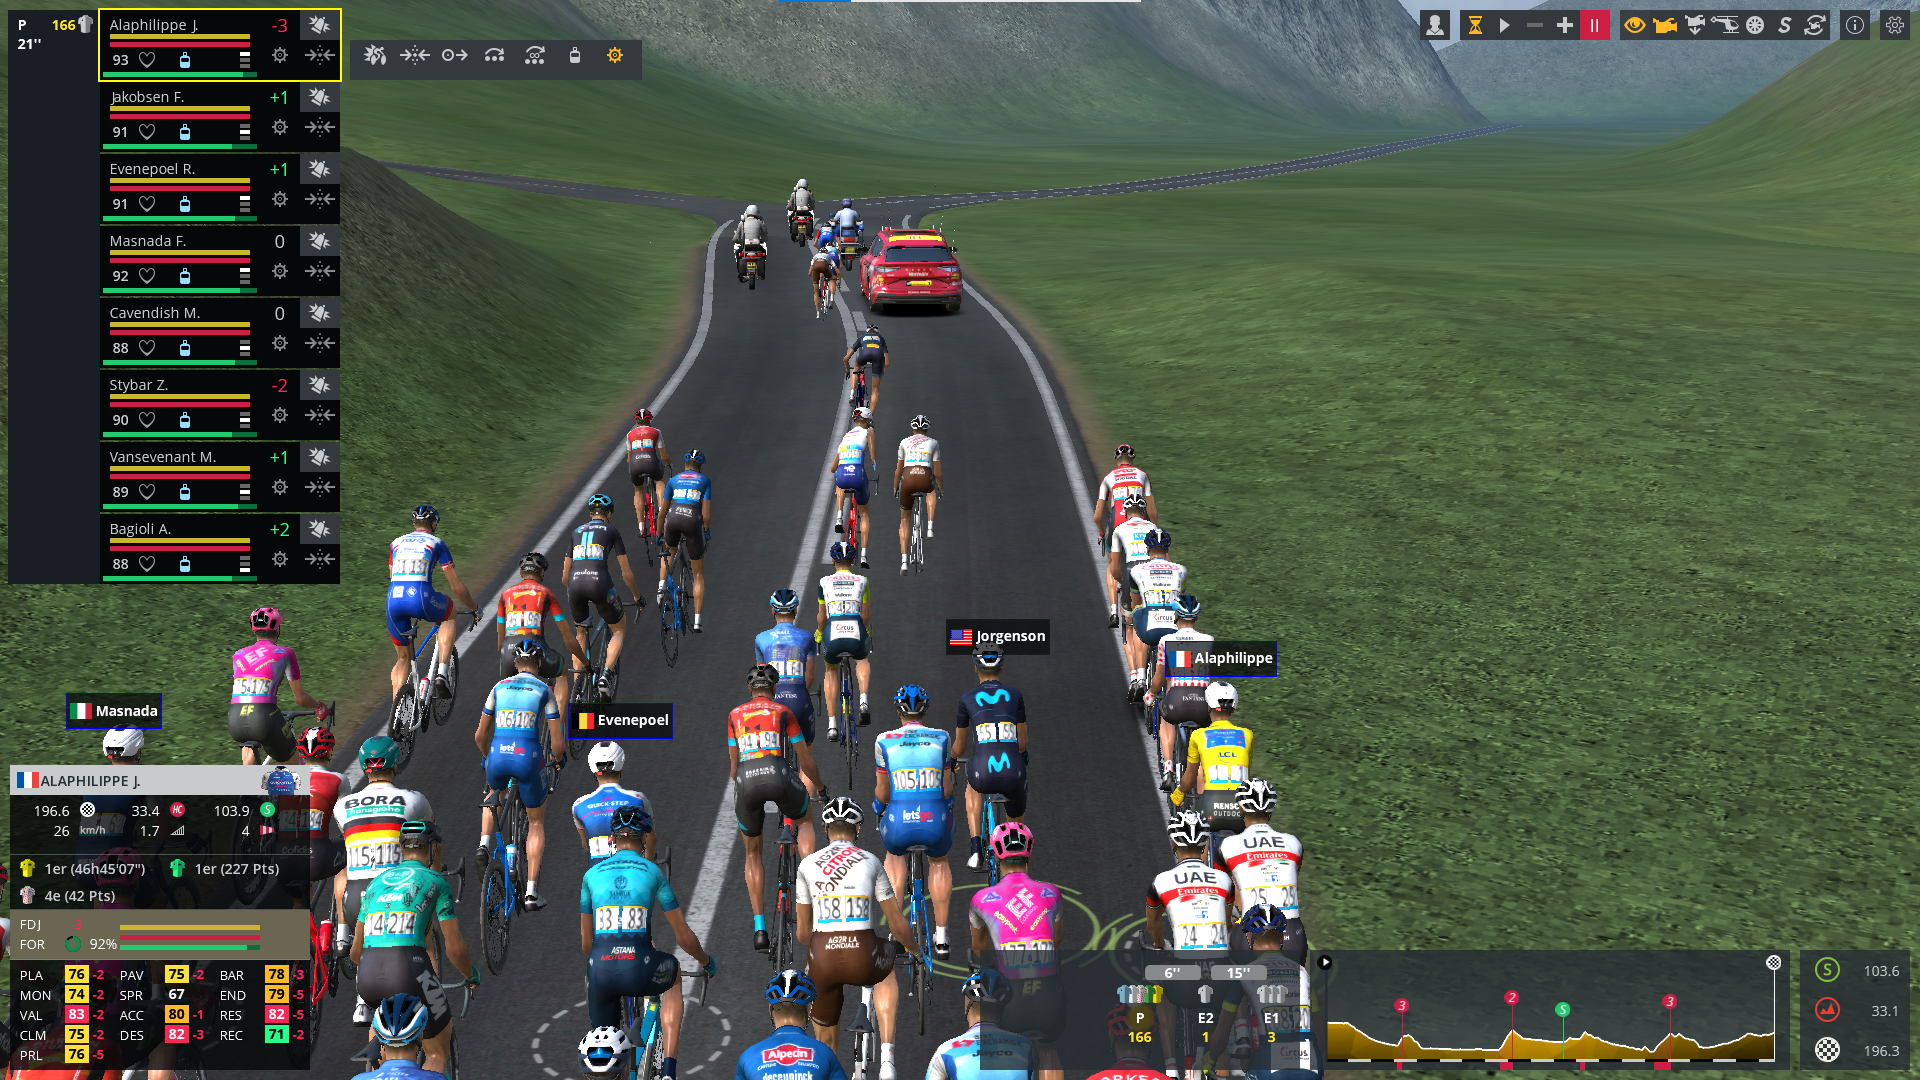 On a testé Pro Cycling Manager 2022 - Velo 101